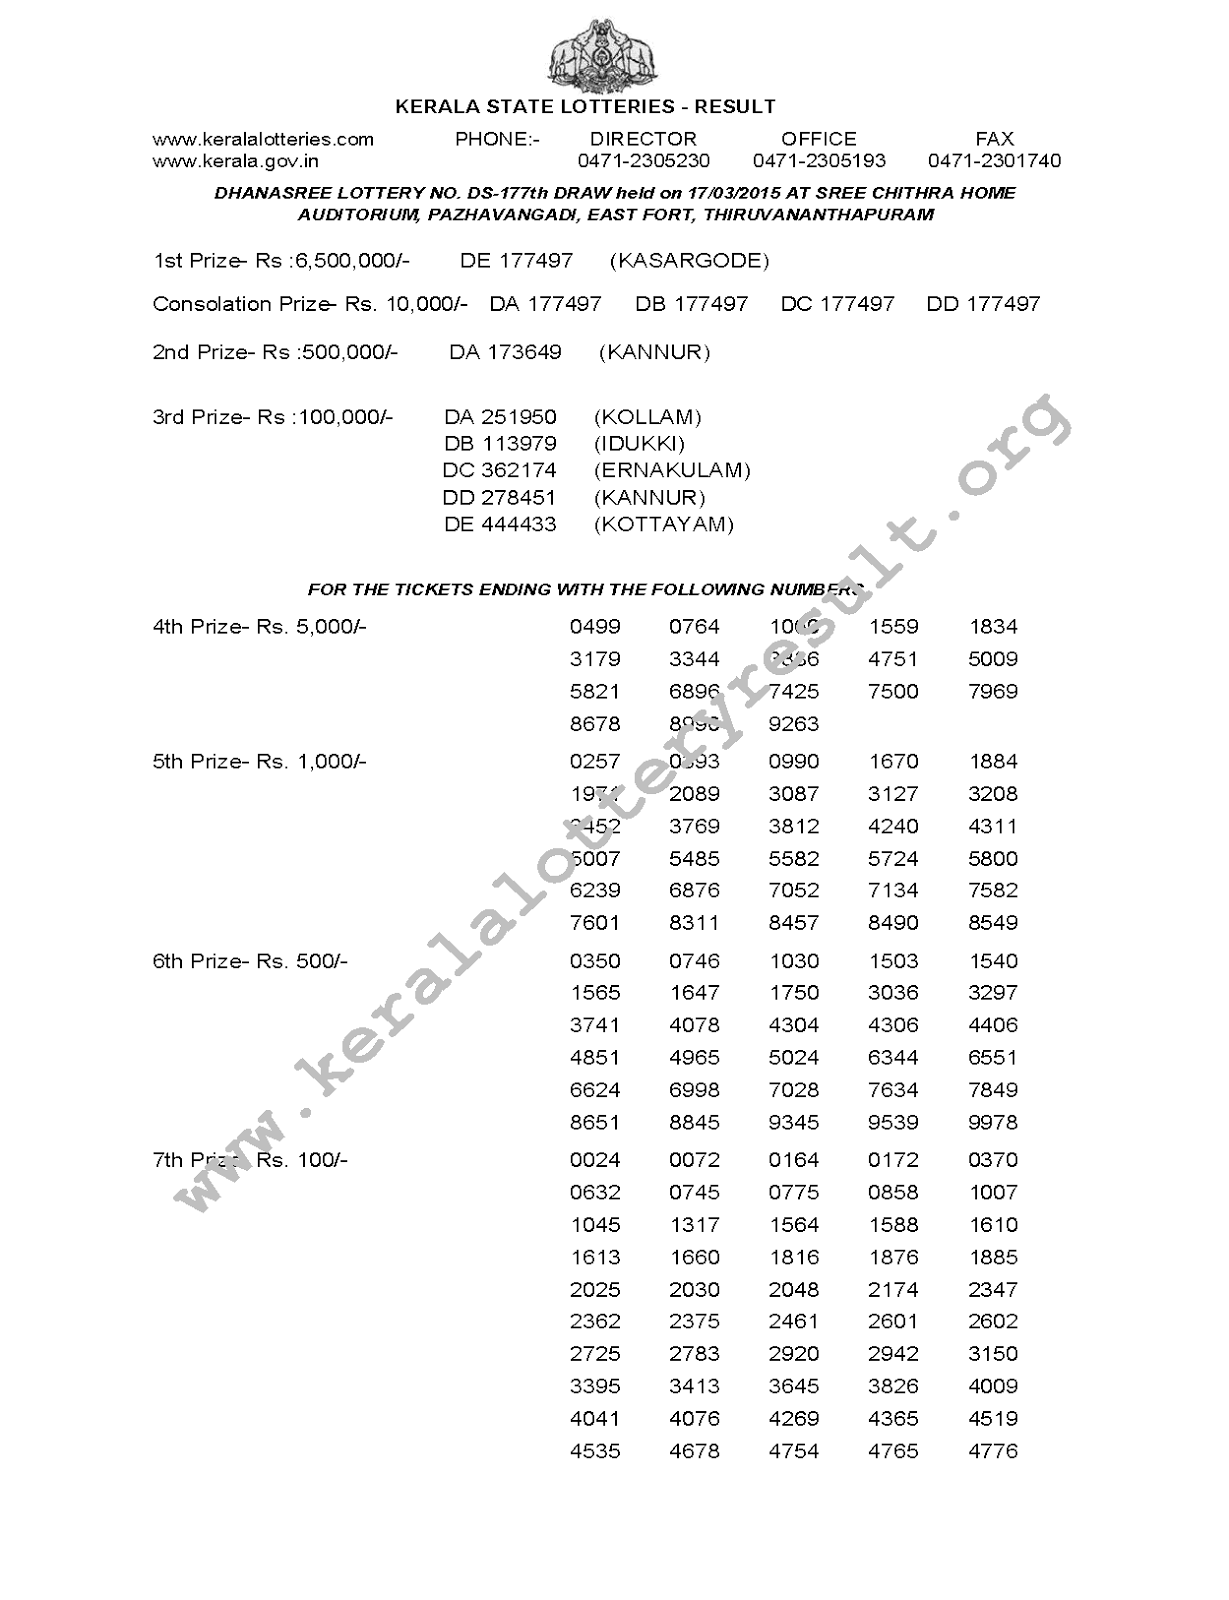 DHANASREE Lottery DS 177 Result 17-3-2015